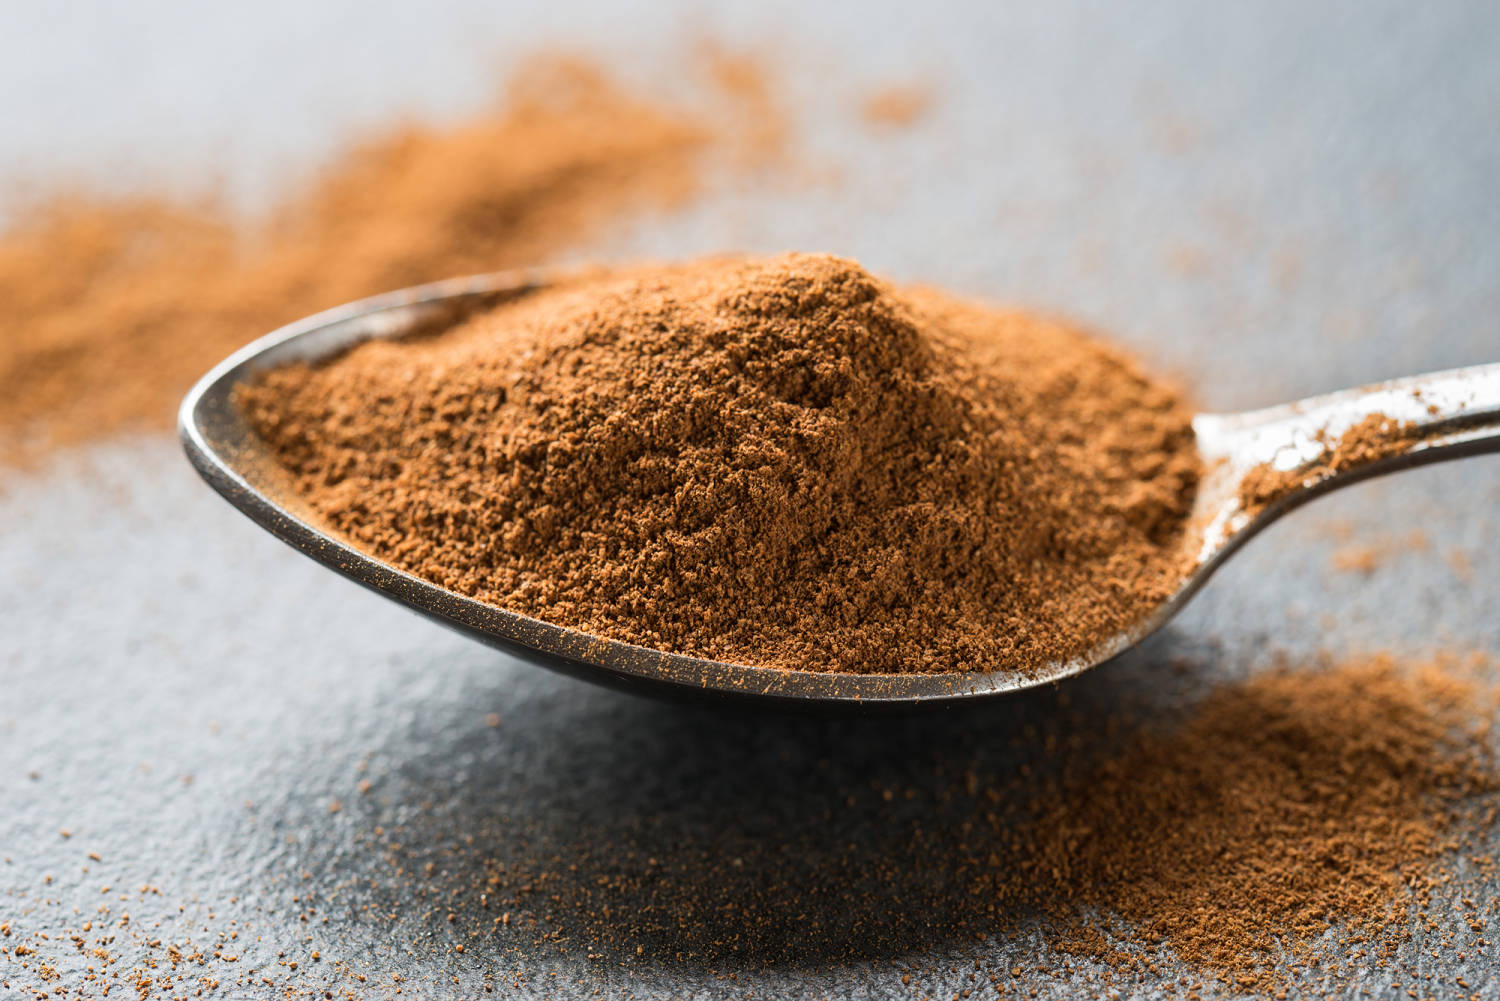 FDA issues a new alert about lead contamination in ground cinnamon